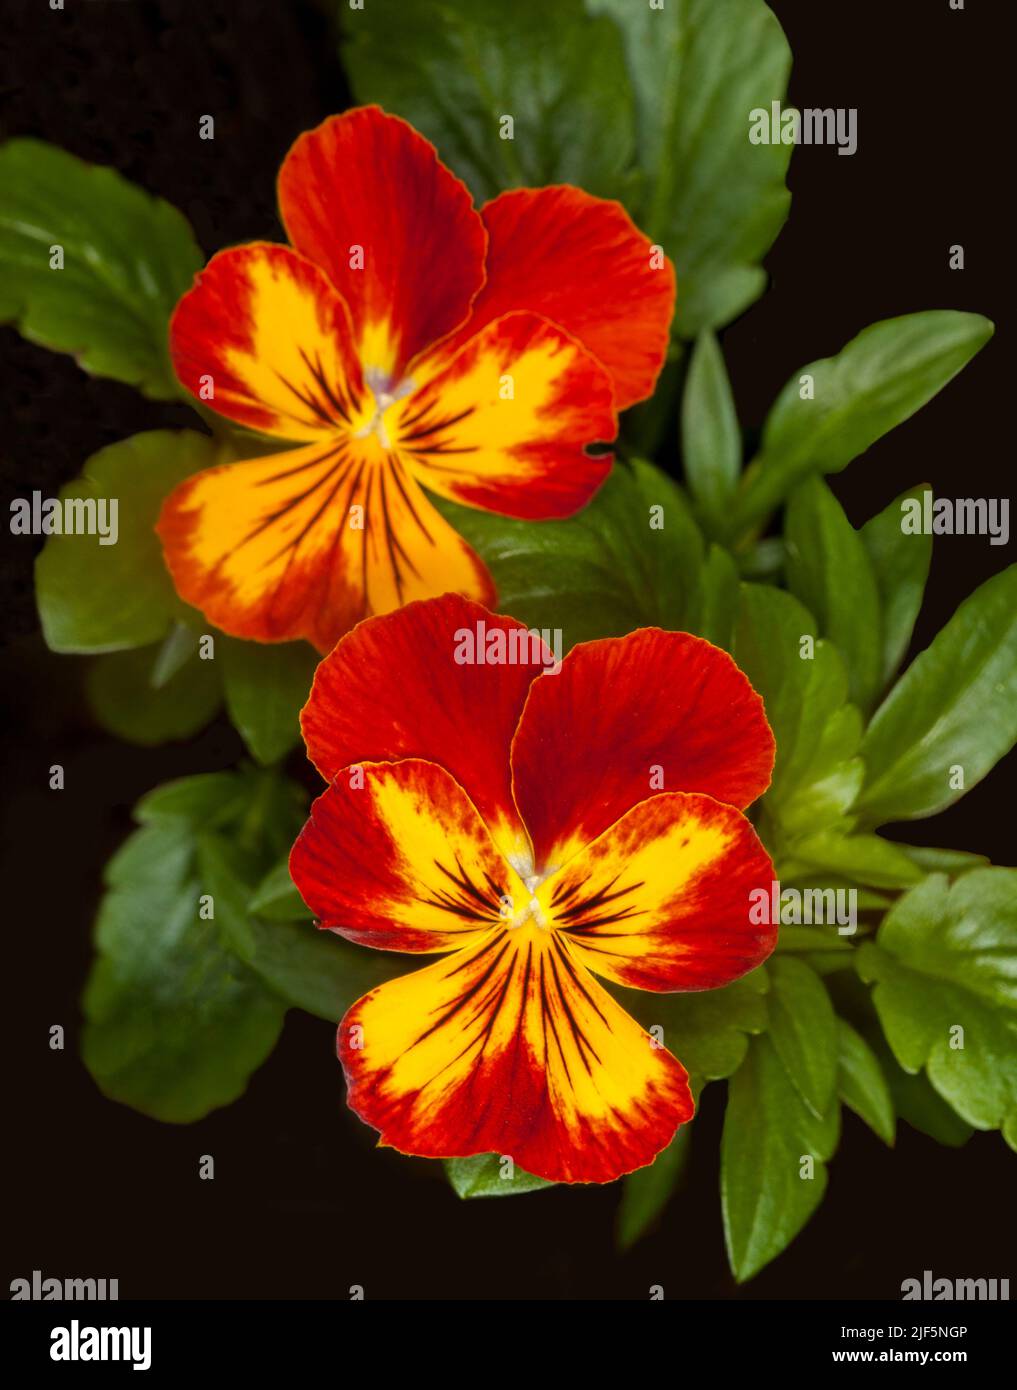 Two spectacular bright red and yellow Pansy flowers and green leaves on dark background in Australia Stock Photo